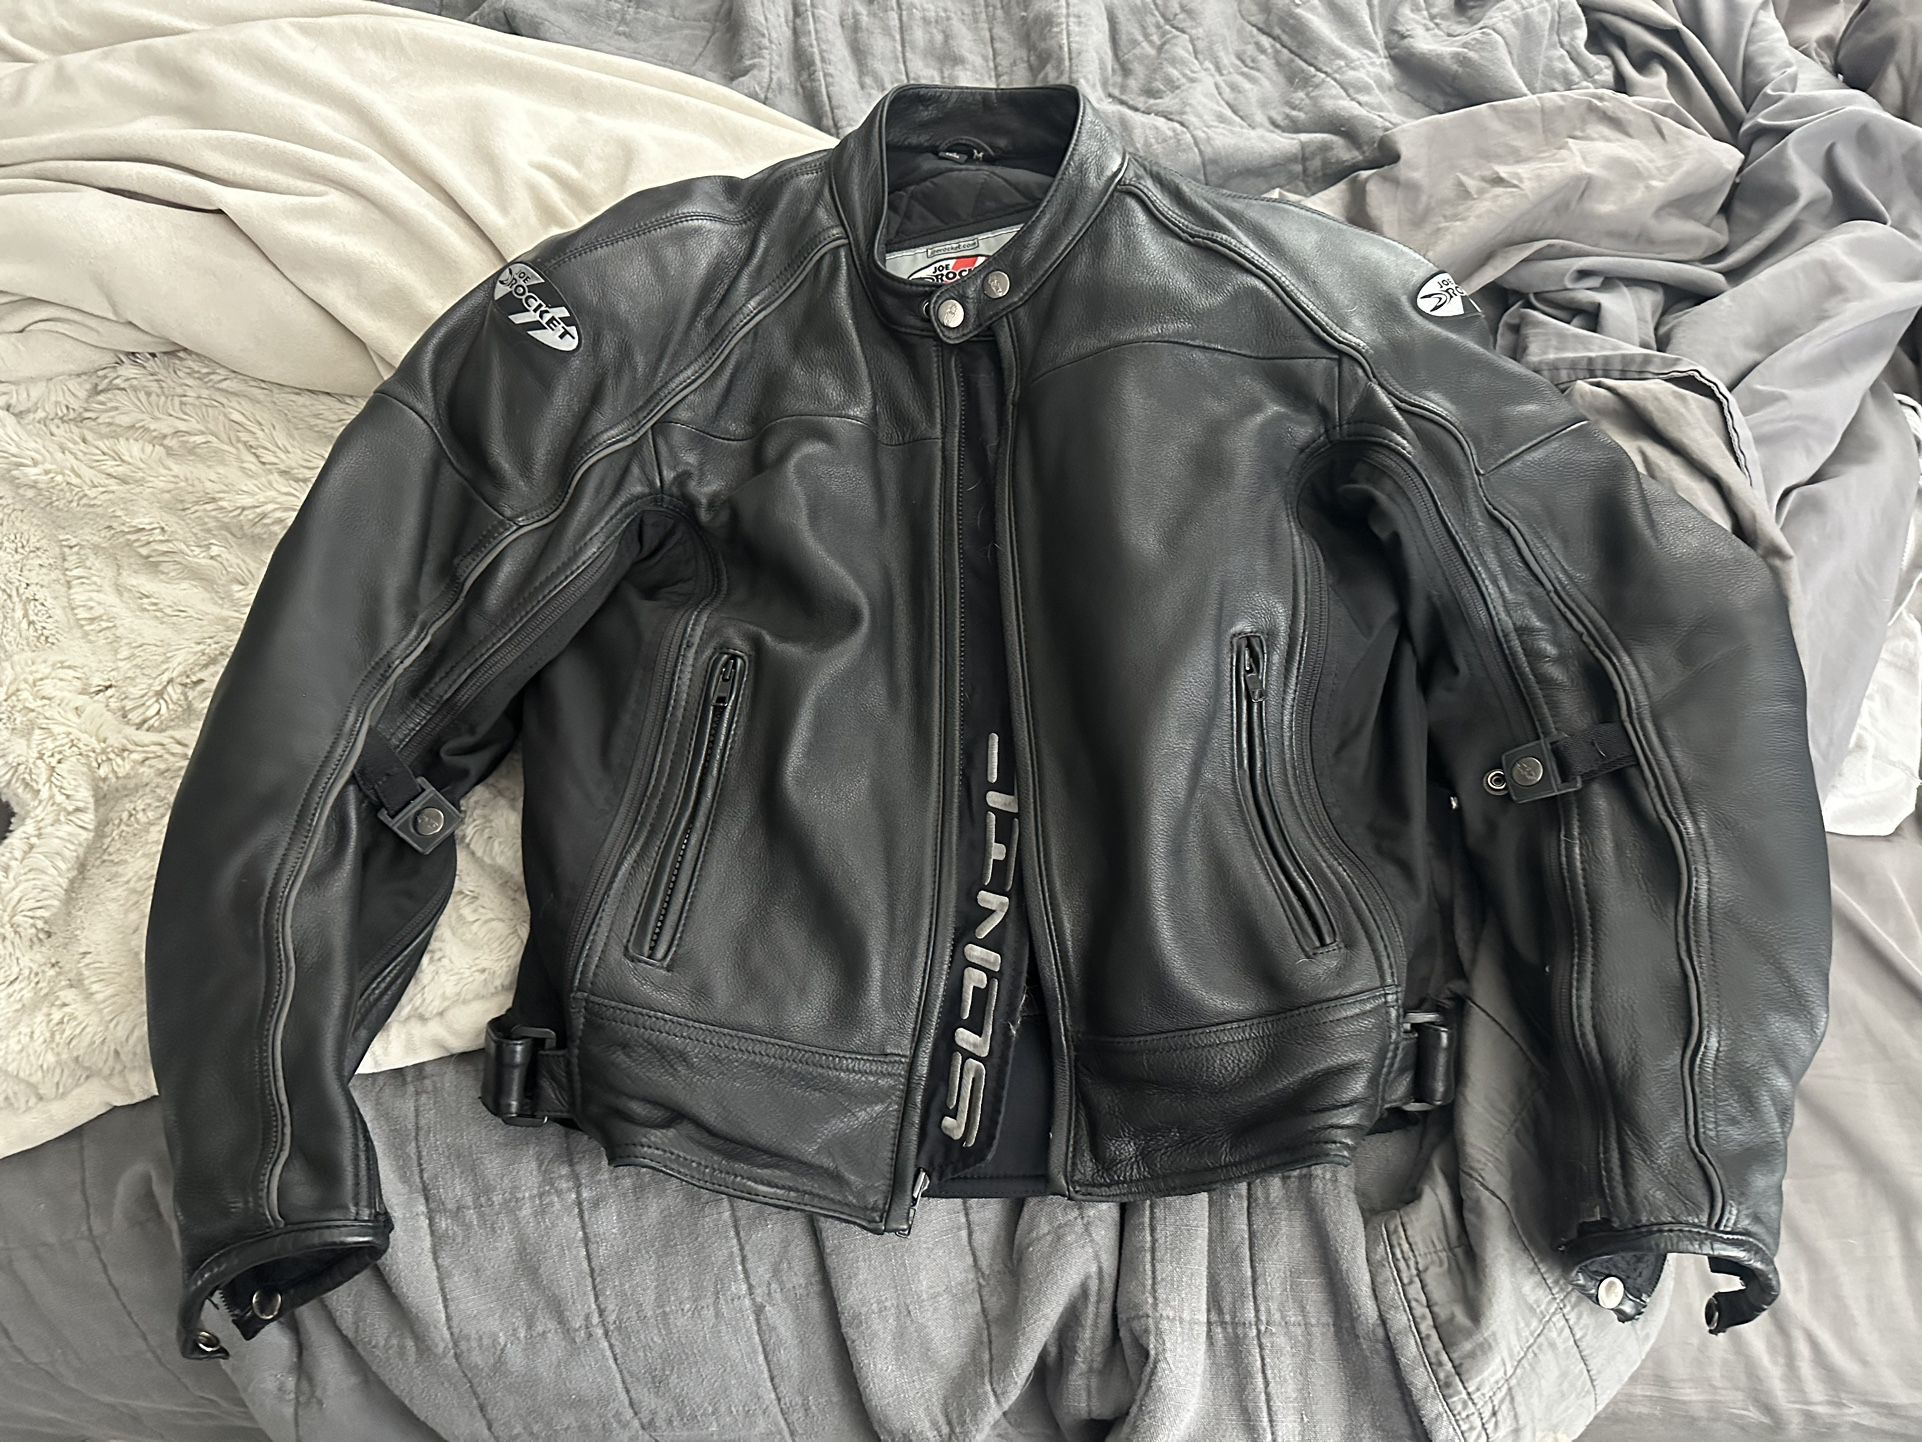 Leather Motorcycle Jacket With Armor